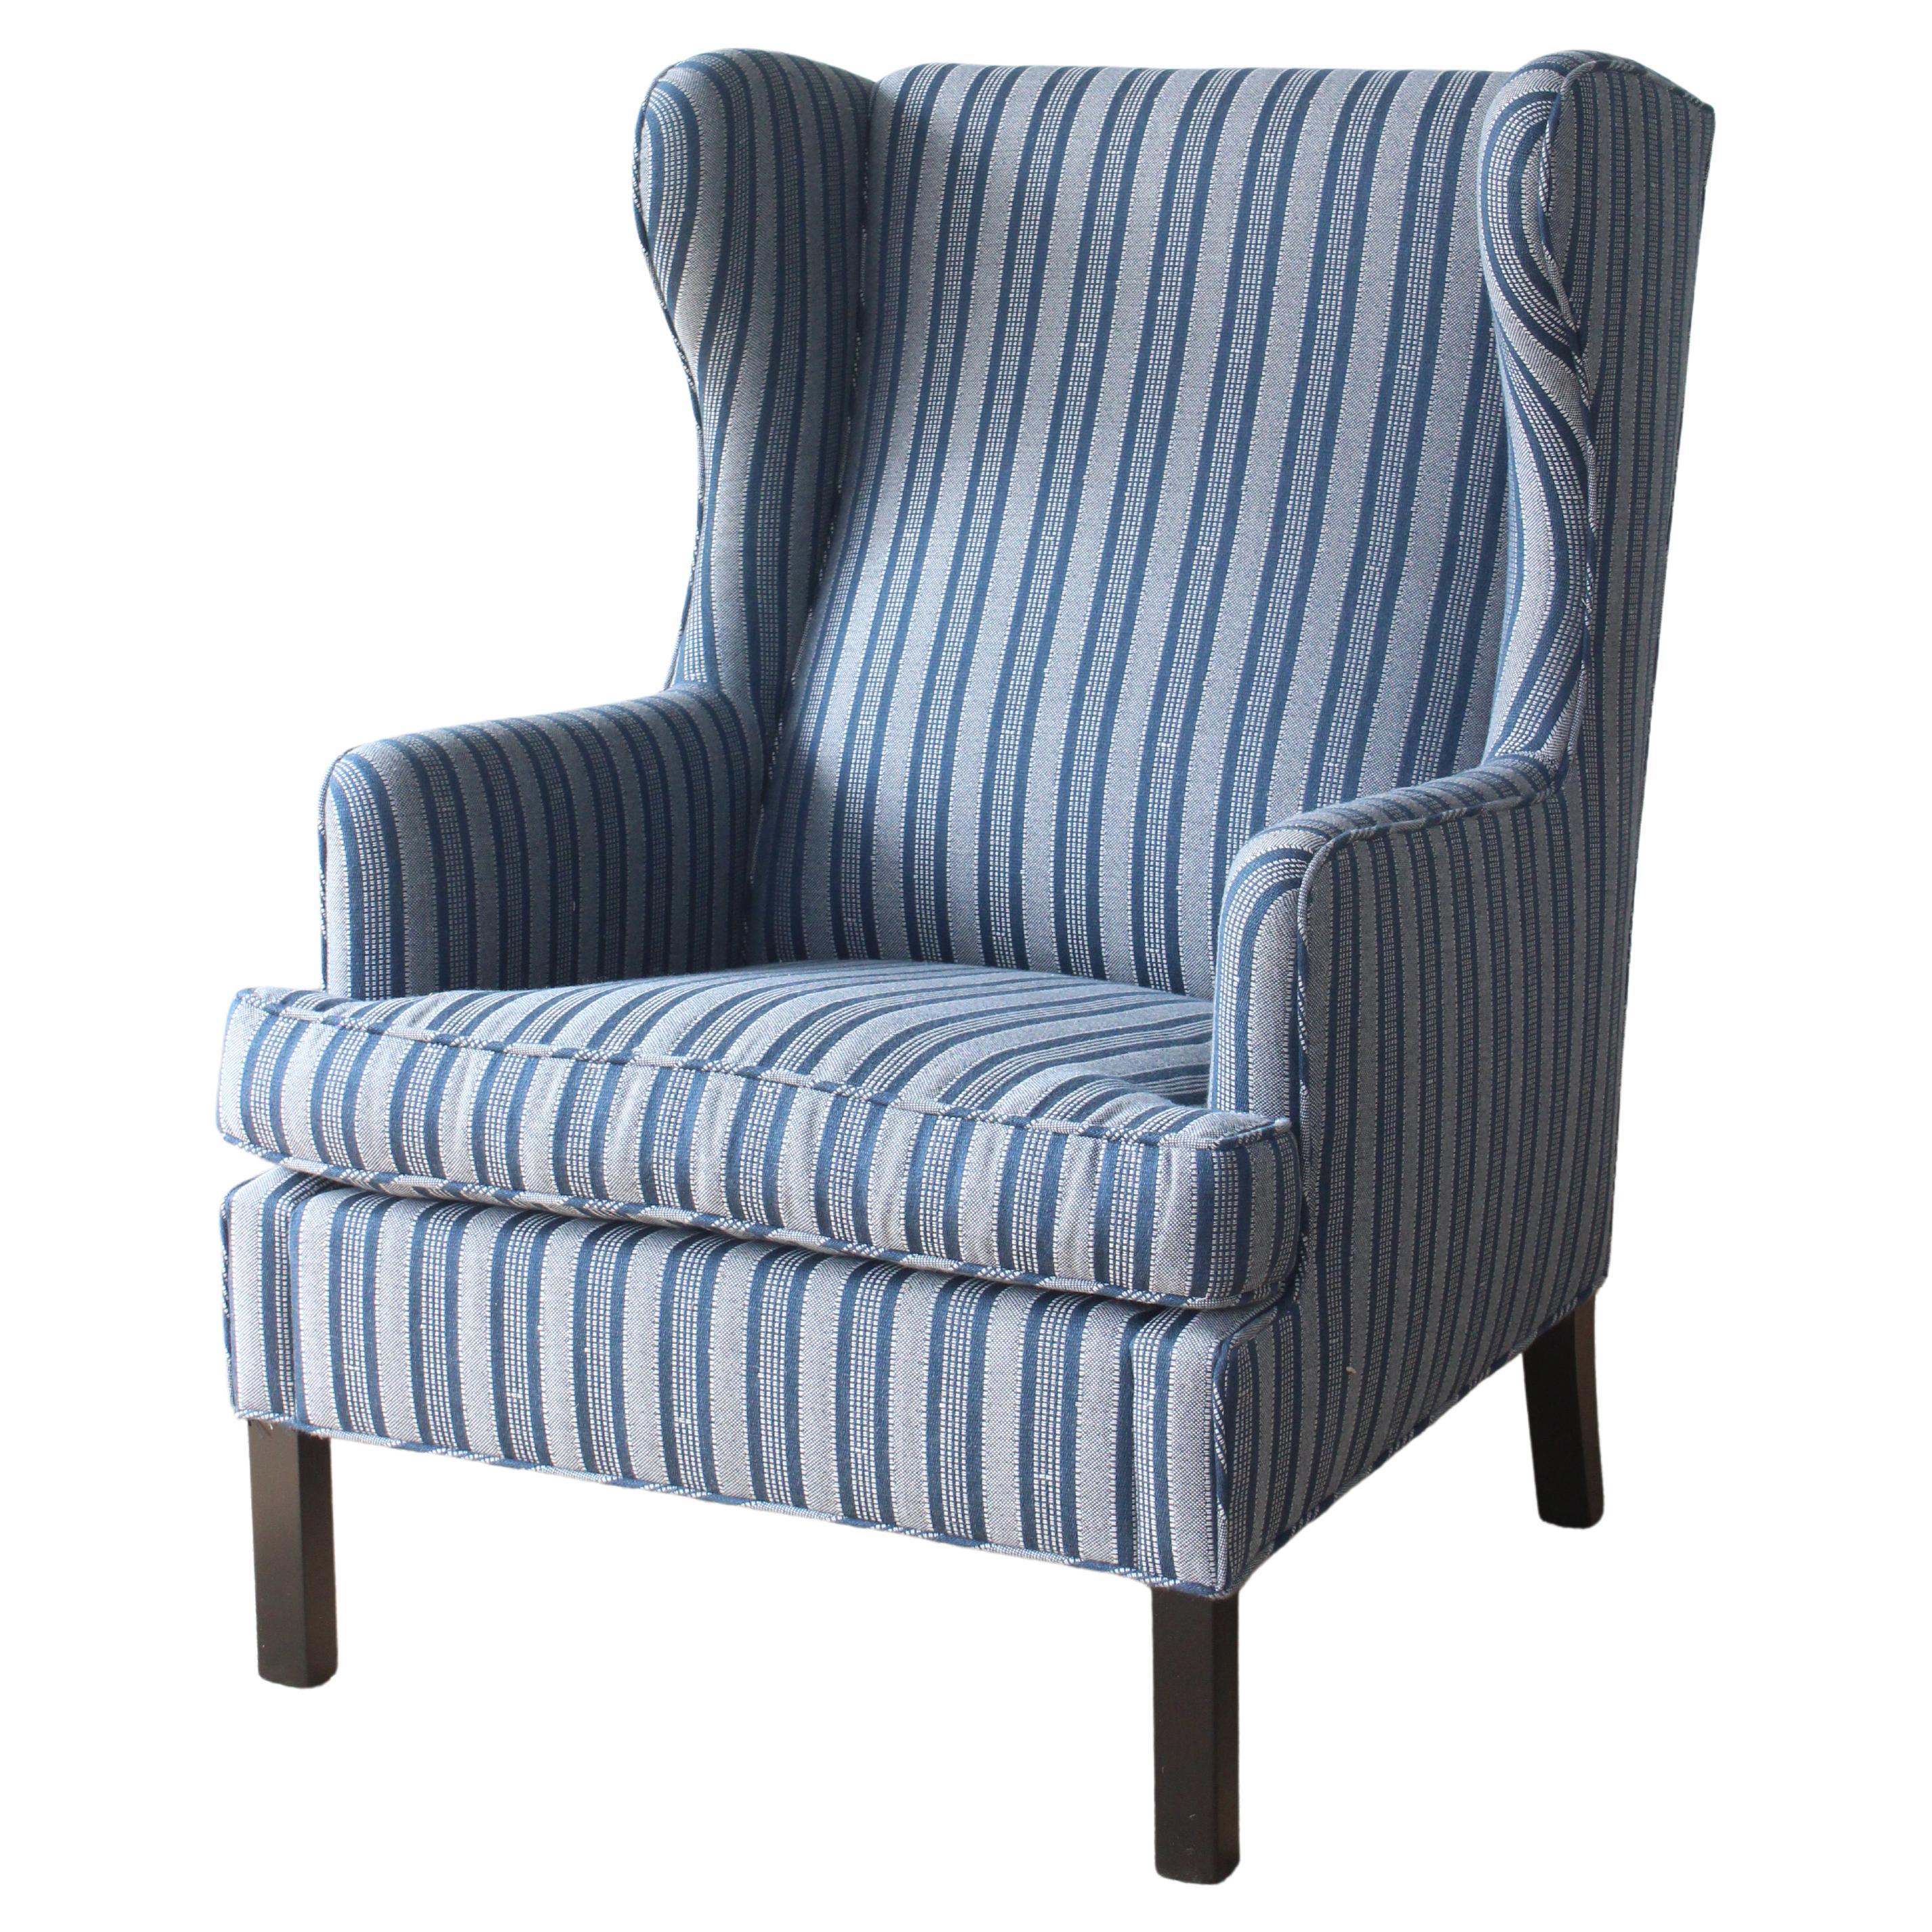 1950s Danish High Back Wing Chair Upholstered in Peter Dunham Textiles Fabric